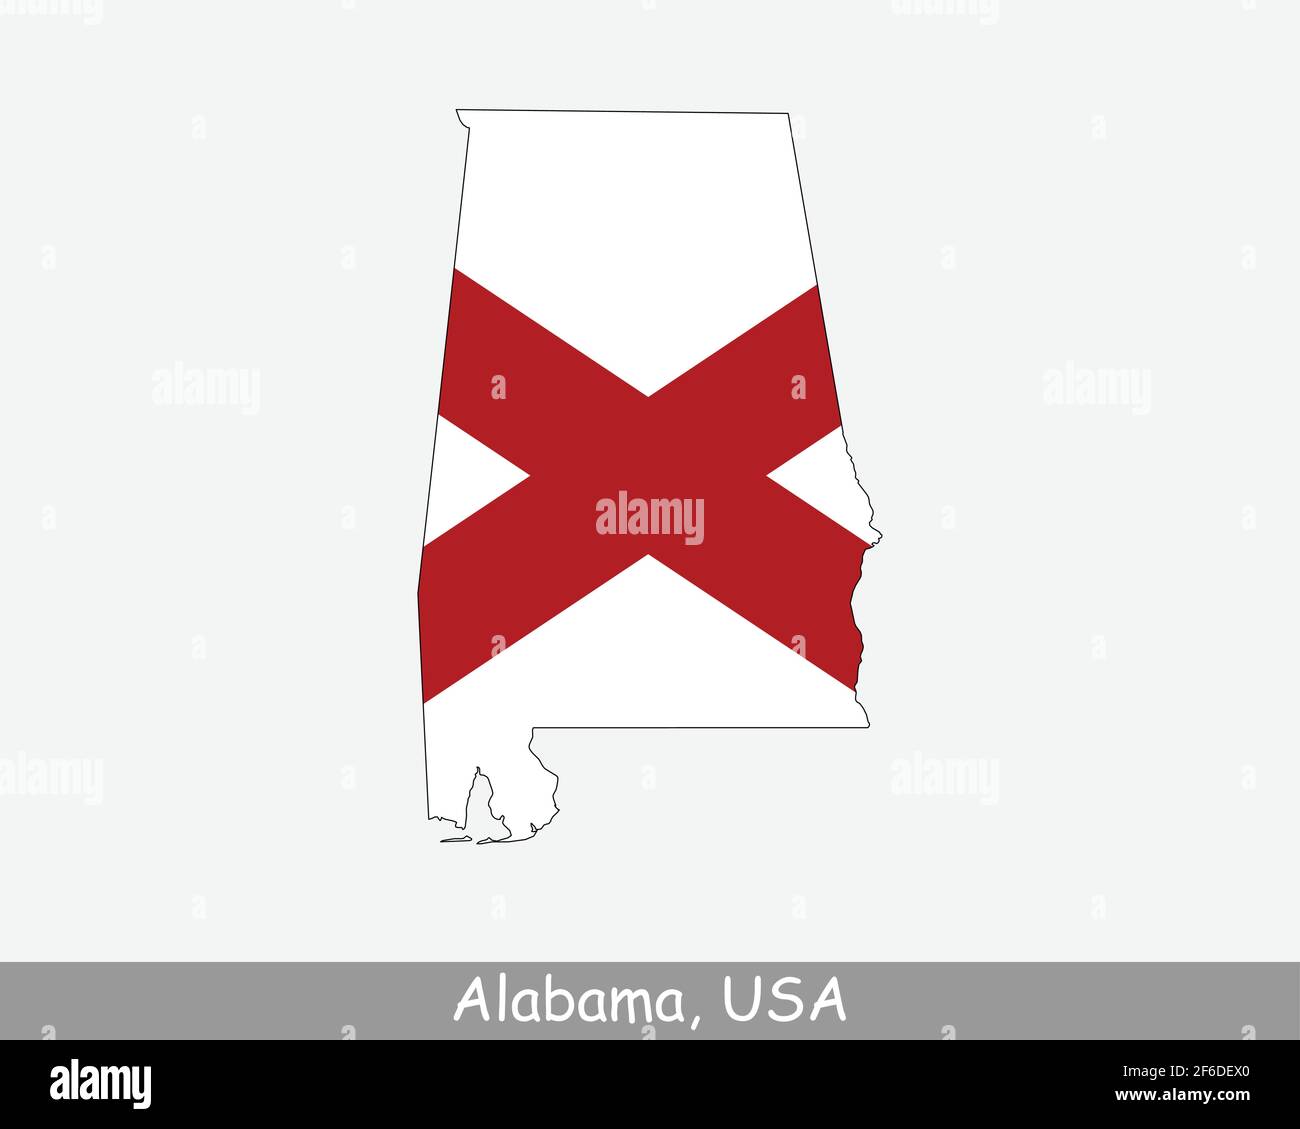 Alabama Map Flag. Map of Alabama, USA with the state flag of Alabama isolated on white background. United States, America, American, United States of Stock Vector